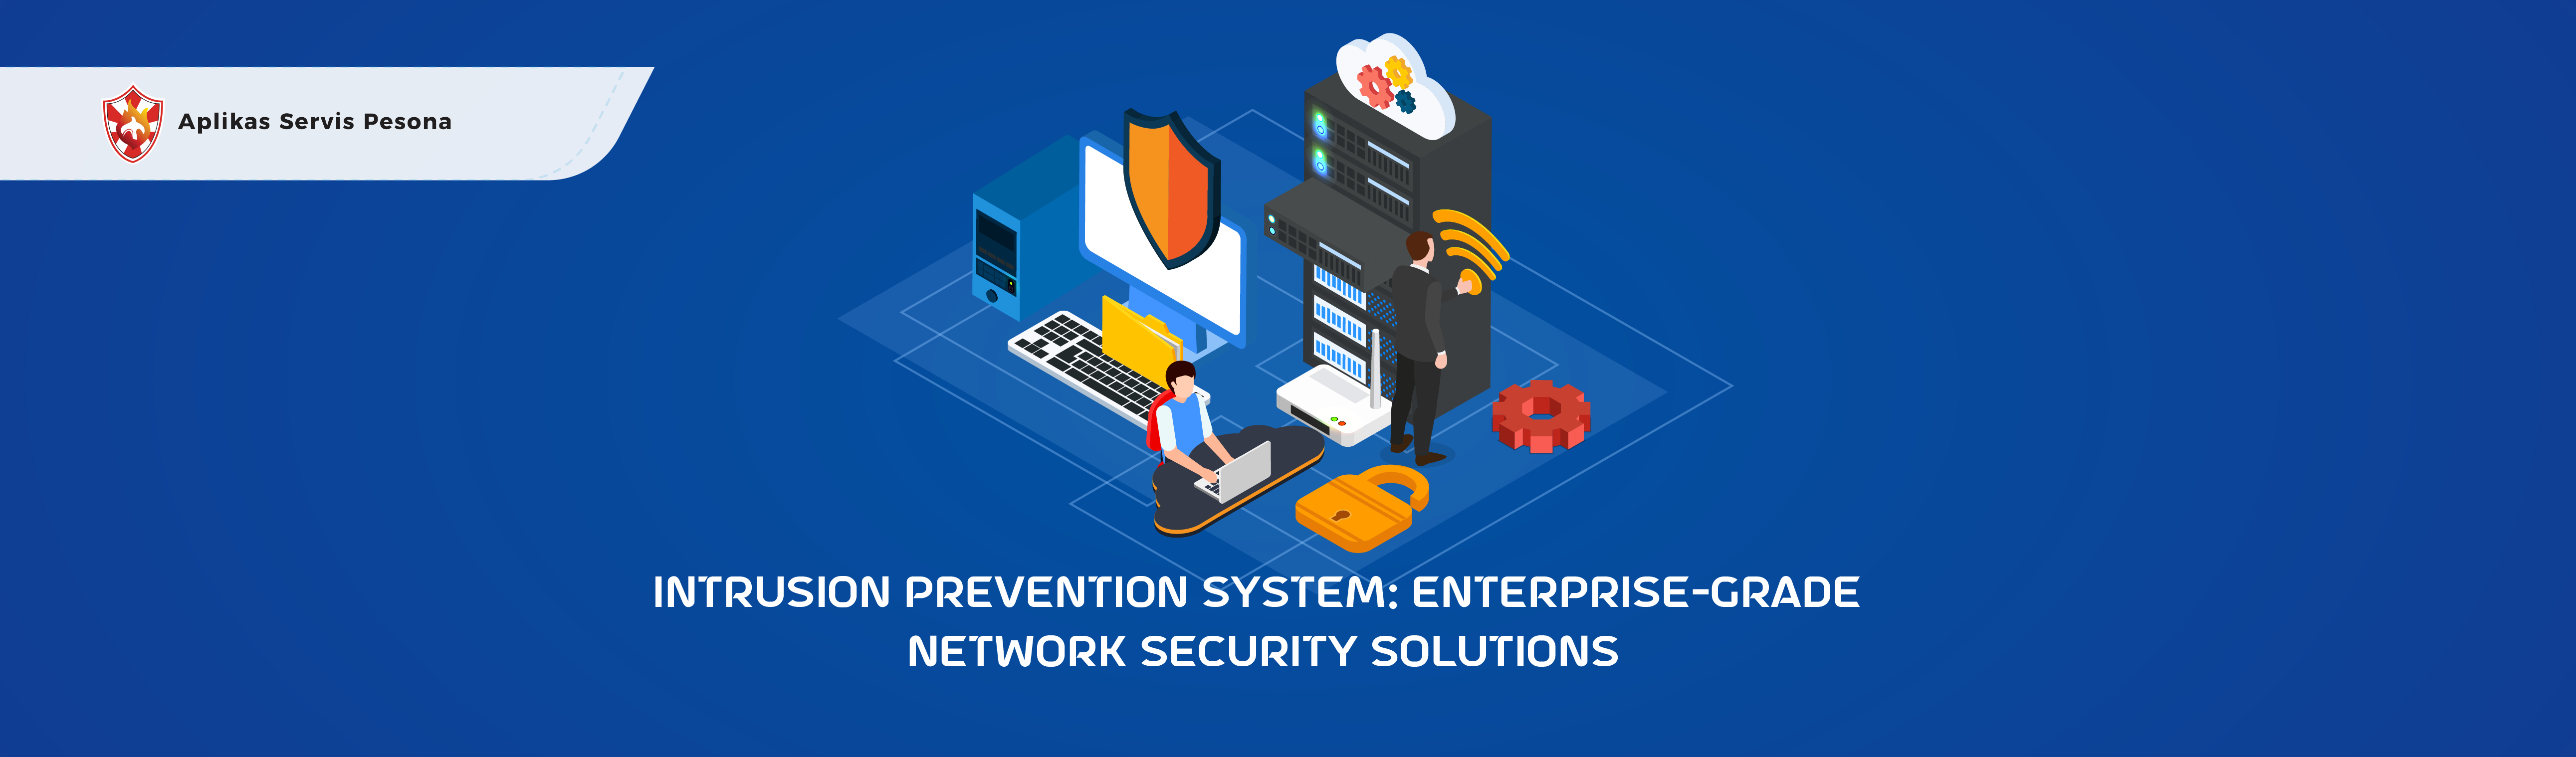 Intrusion Prevention System: Enterprise-Grade Network Security Solutions